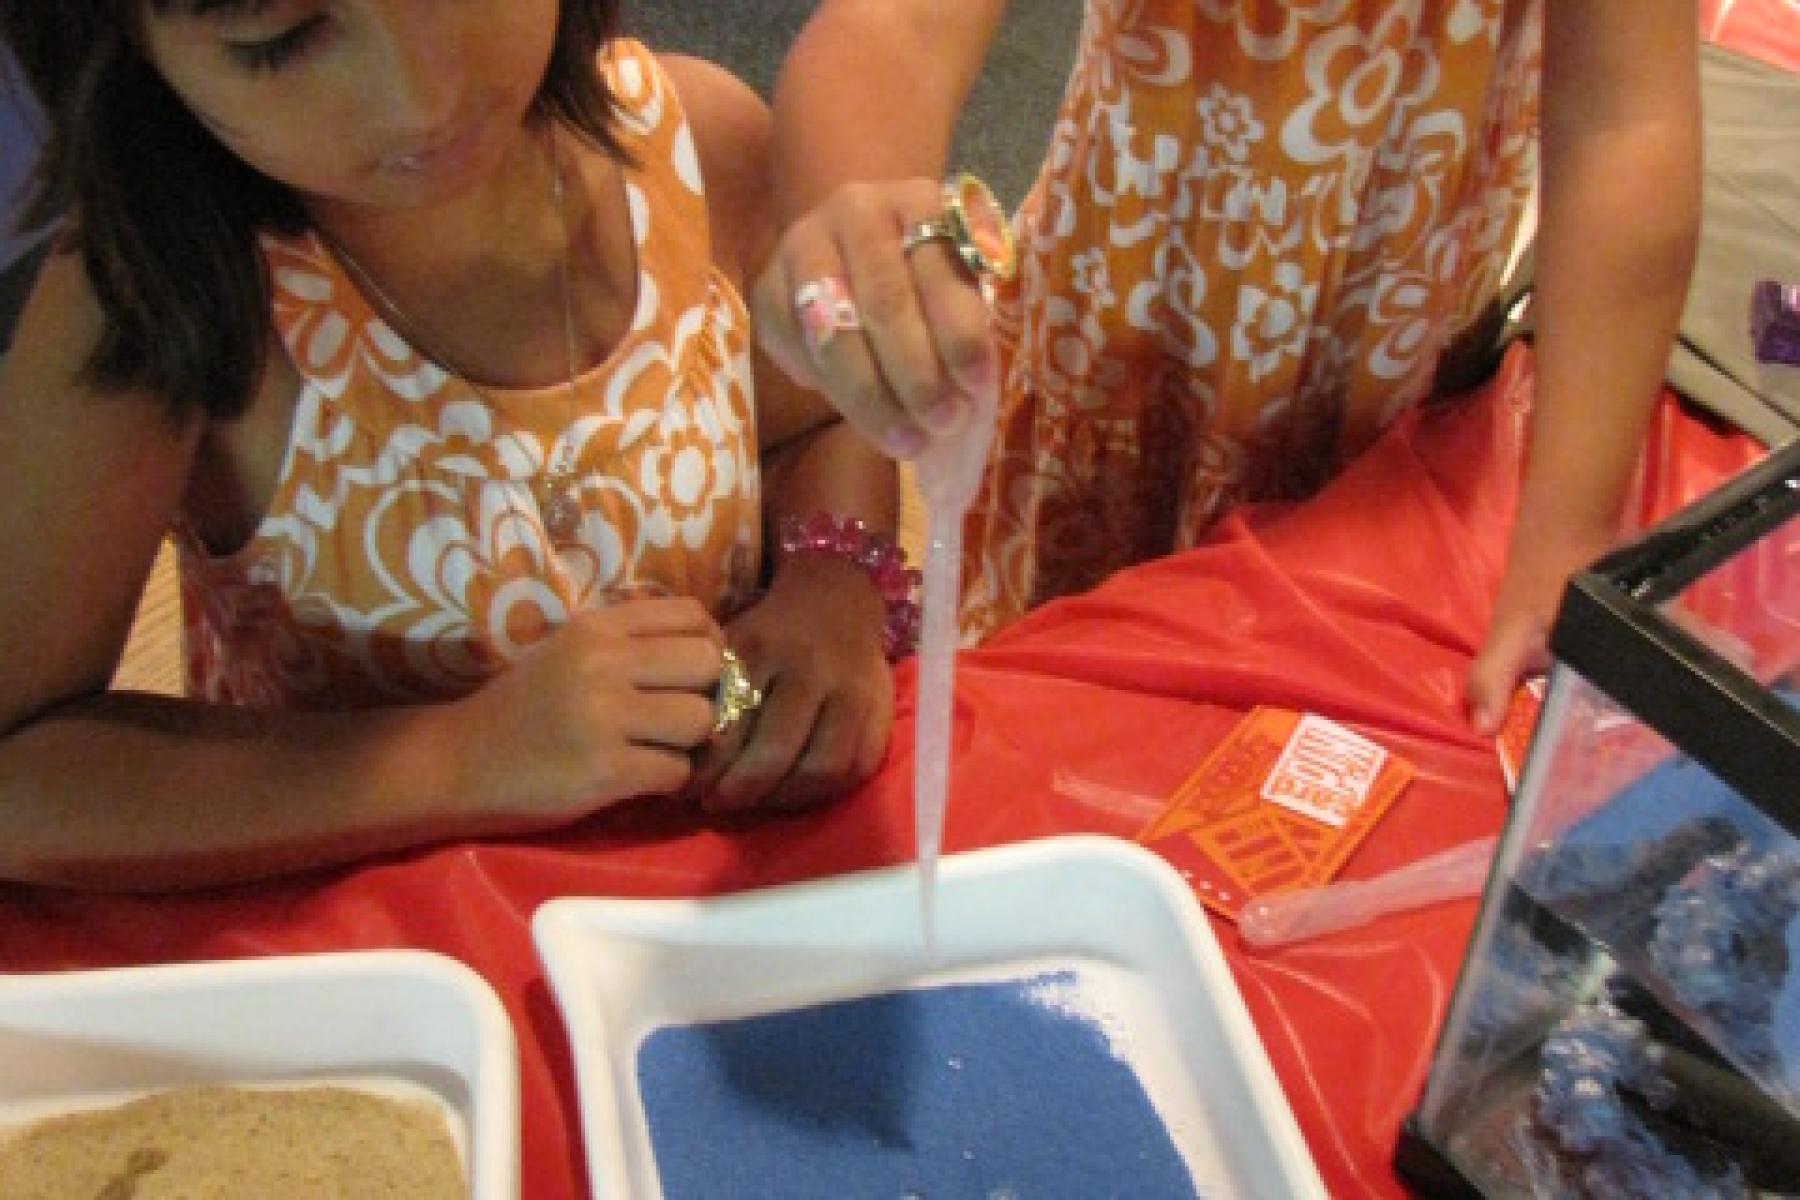 Two kids pouring water on blue hydrophobic sand in a white tray.